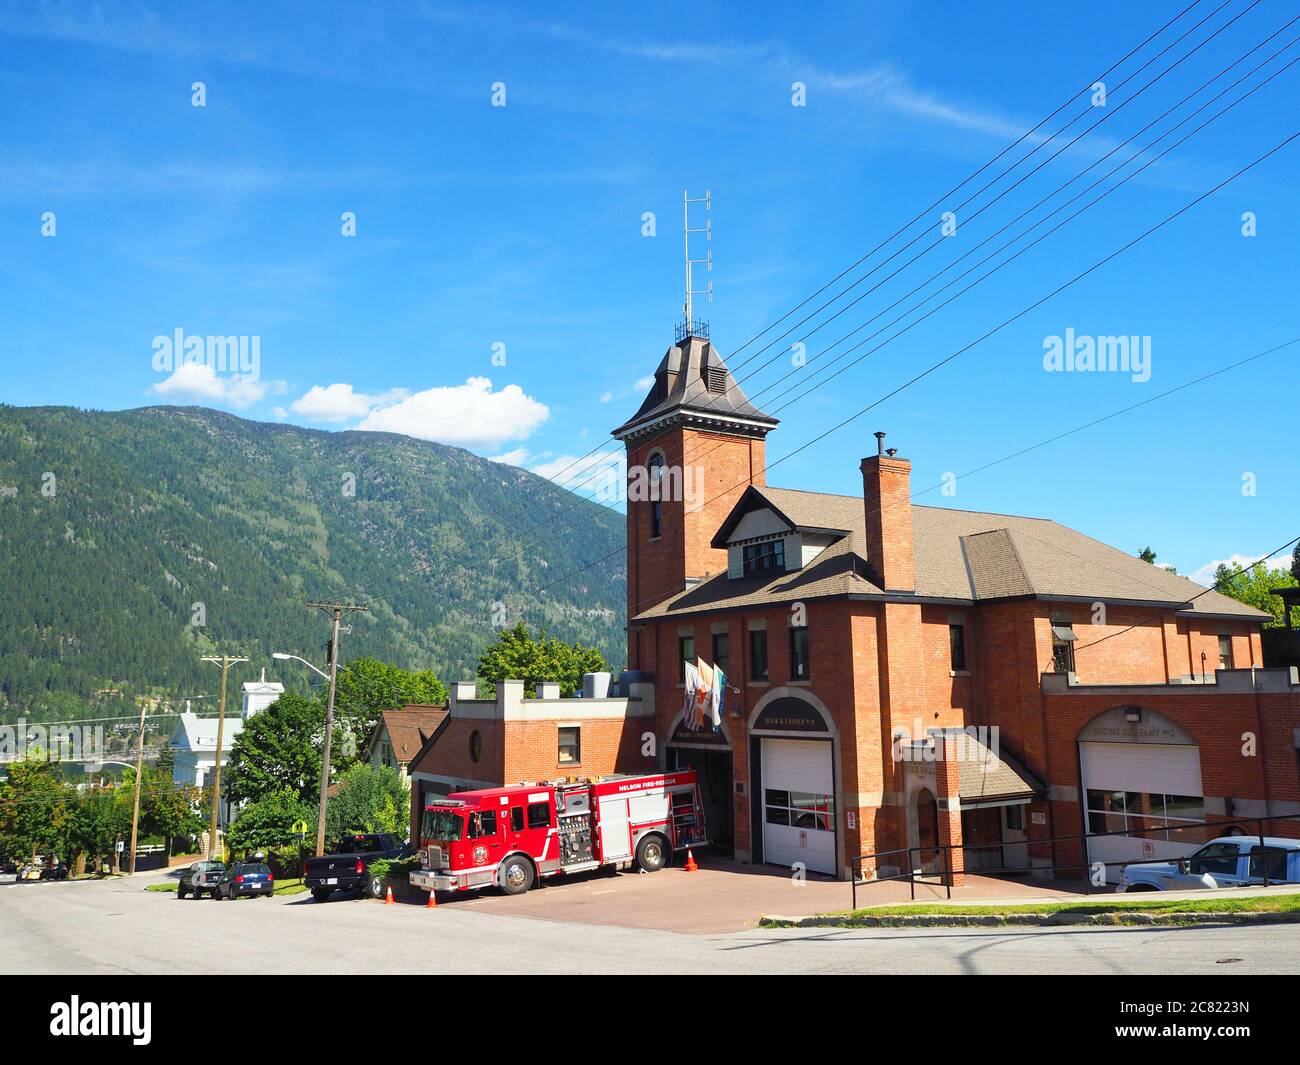 Nelson Fire Department building used in the Steve Martin movie Roxanne, Nelson, British Columbia, Canada Stock Photo